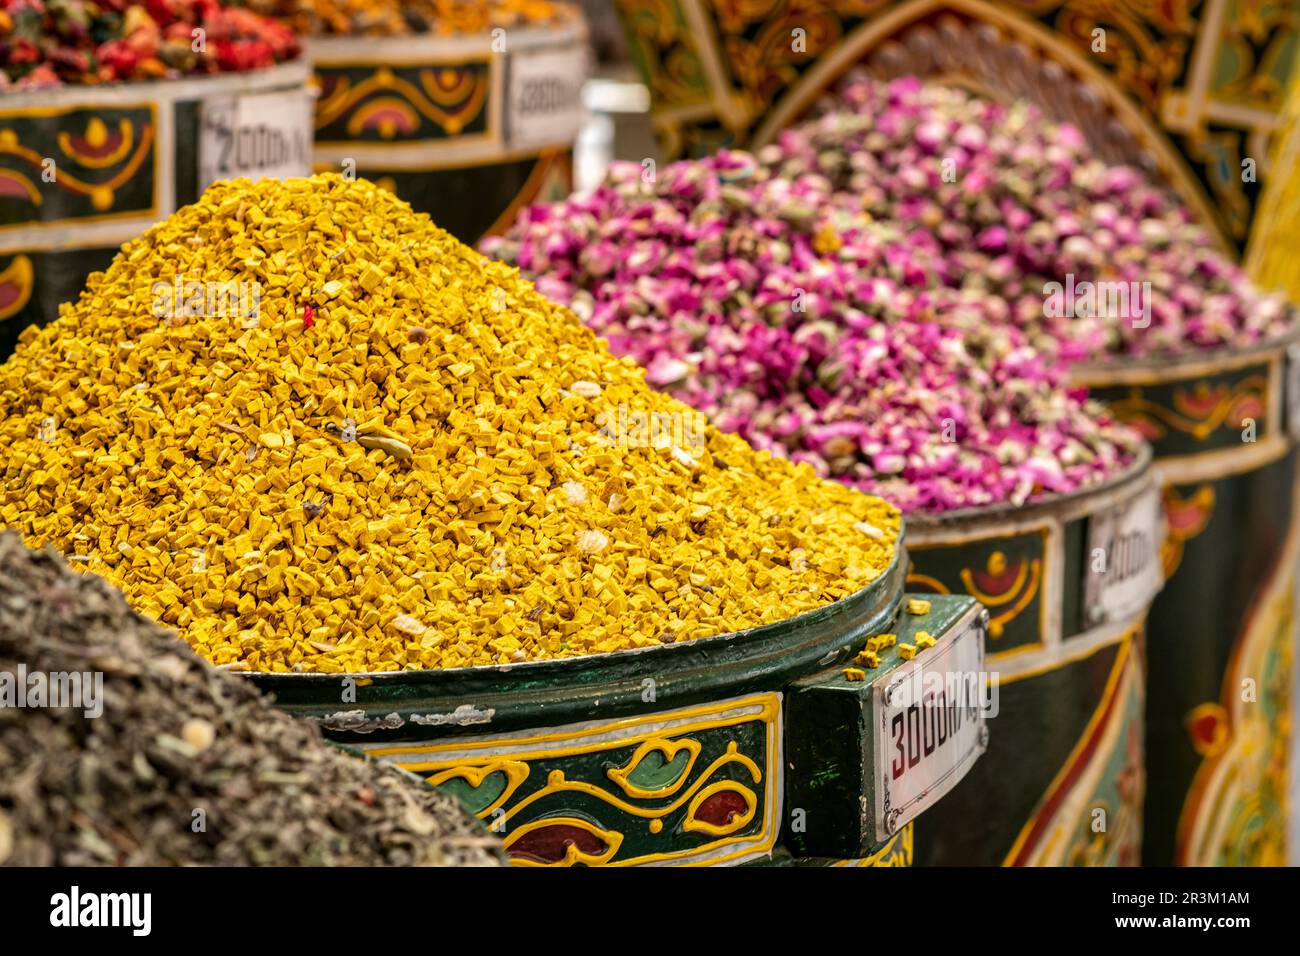 Heaped metal cans filled with colourful dried flowerheads and other herbs outside a herbal remedy souk in Marrakesh Medina, Morocco. Stock Photo